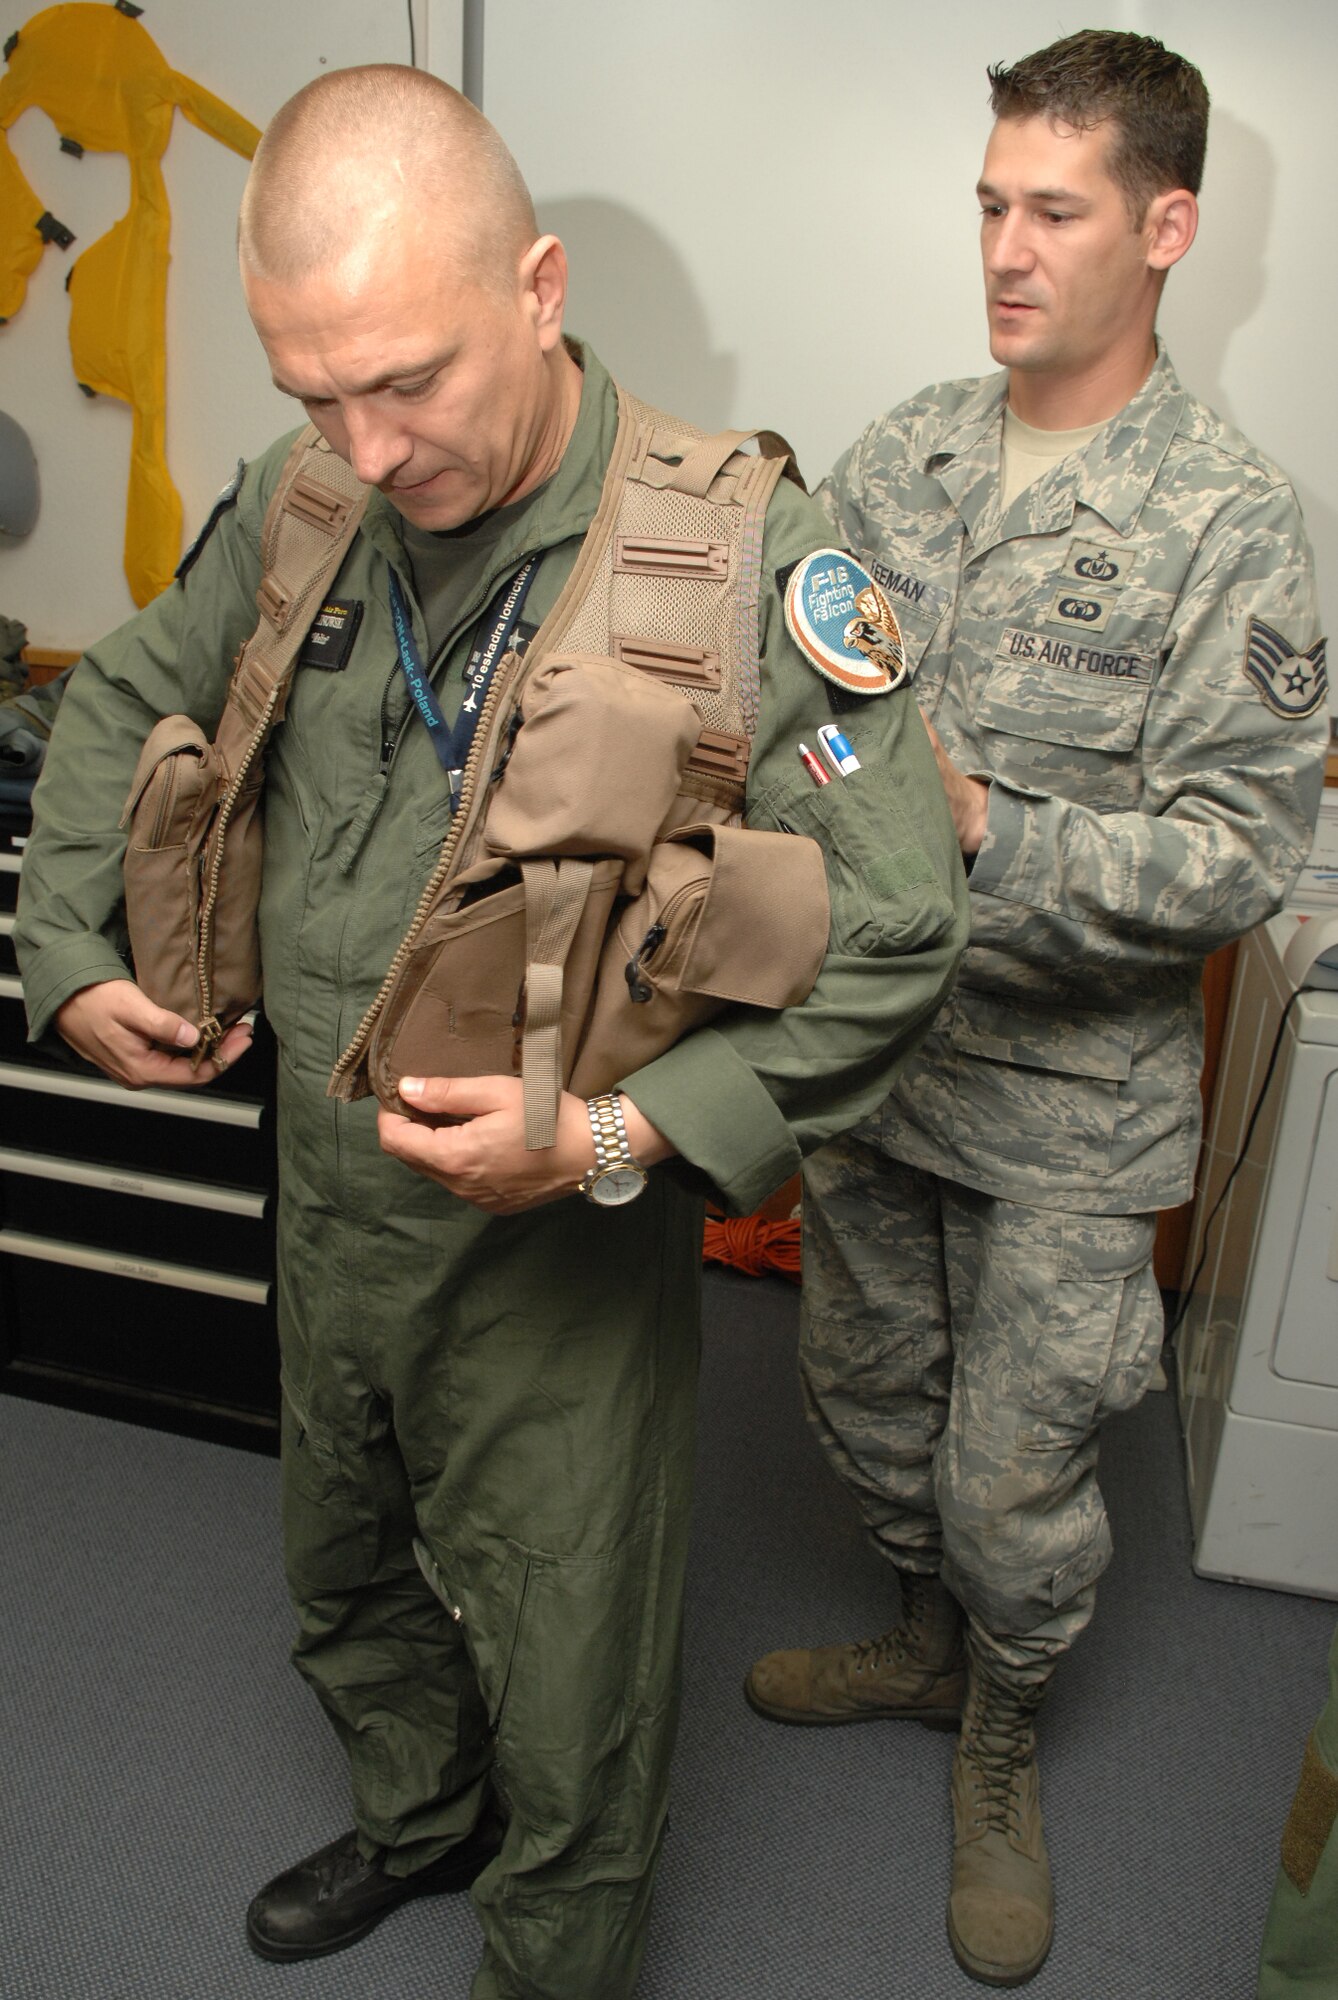 SPANGDAHLEM AIR BASE, Germany - Staff Sgt. Marcus Freeman, 52nd Component Maintenance Squadron, helps Lt. Col. Dariusz Malinowski, 10th Fighter Squadron commander, Lask Air Base, Poland, try on a survival vest during his visit to Spangdahlem Air Base July 29. Four Polish air force members visited Spangdahlem to observe the daily routine and operations tempo of an American F-16 Fighting Falcon squadron and an American air base. (U.S. Air Force photo by Airman 1st Class Nick Wilson)